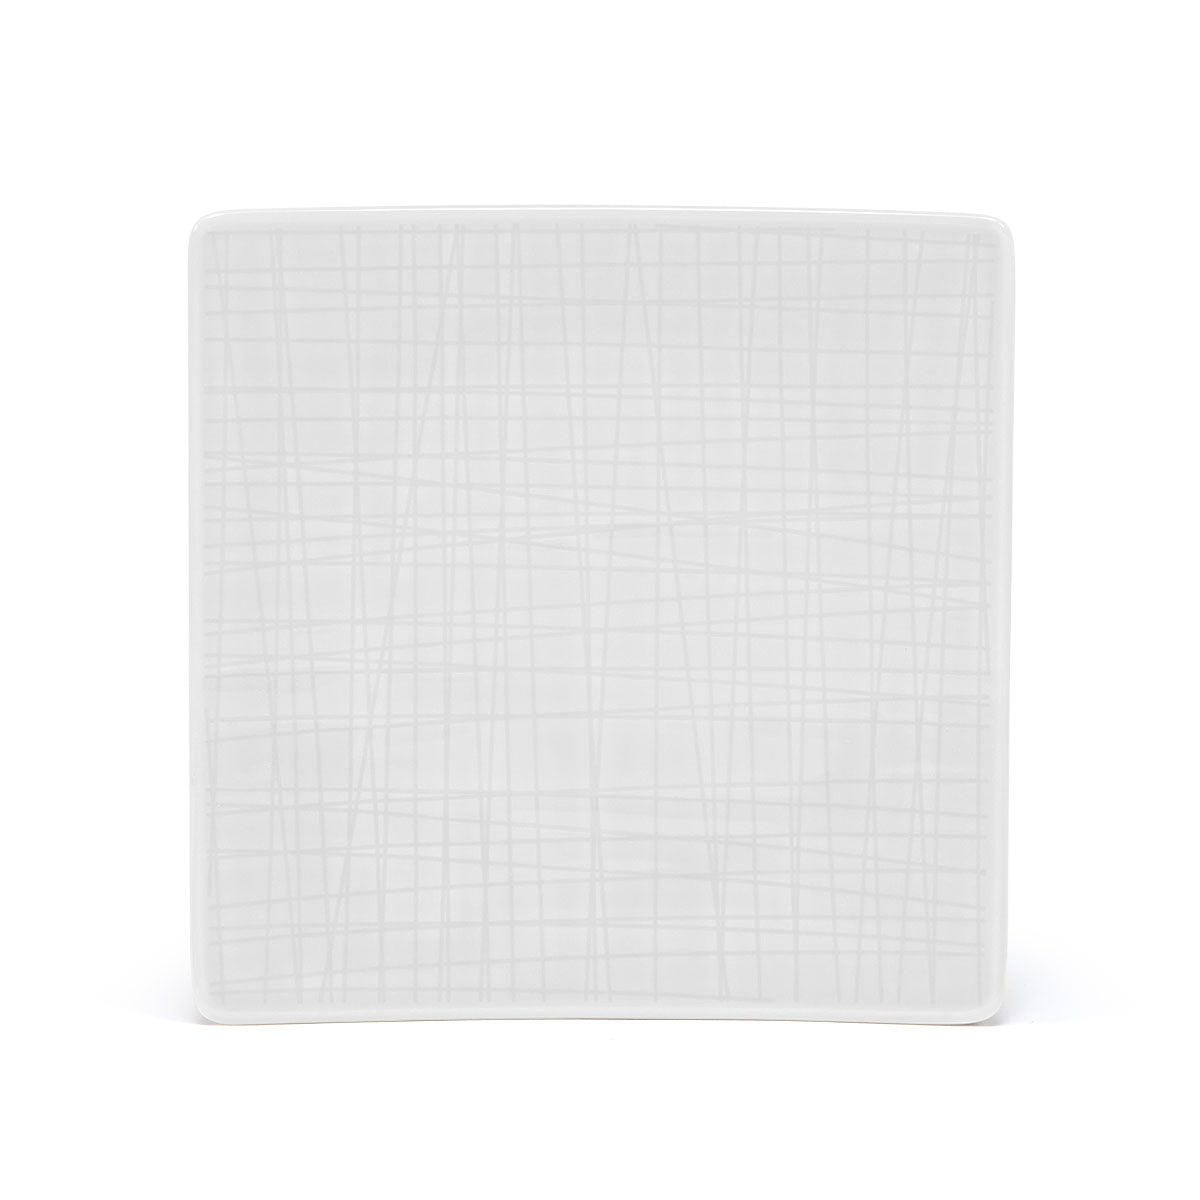 Rosenthal Weiss White Square Platter